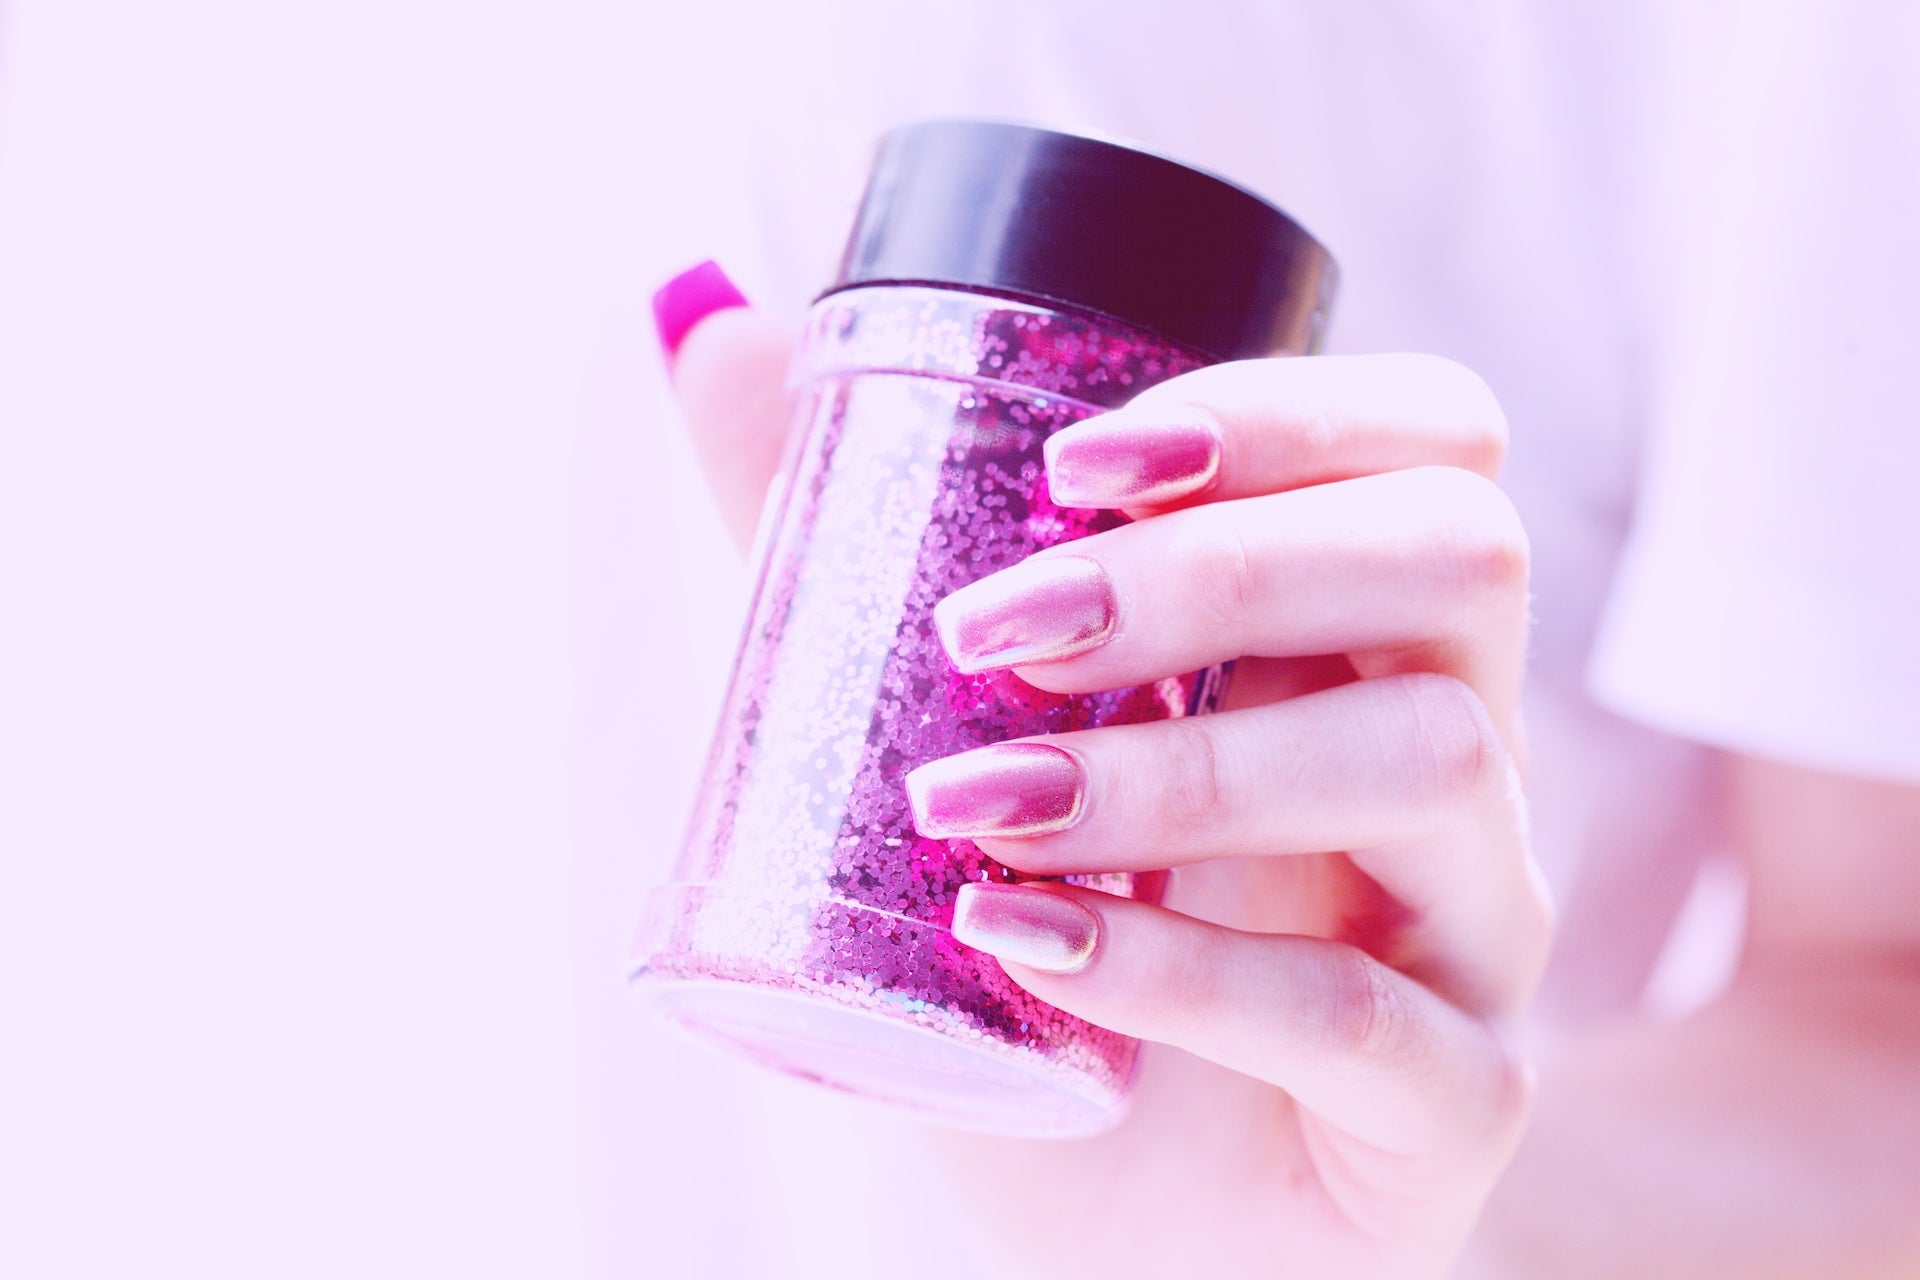 Hand with metallic magenta nails holding glitter